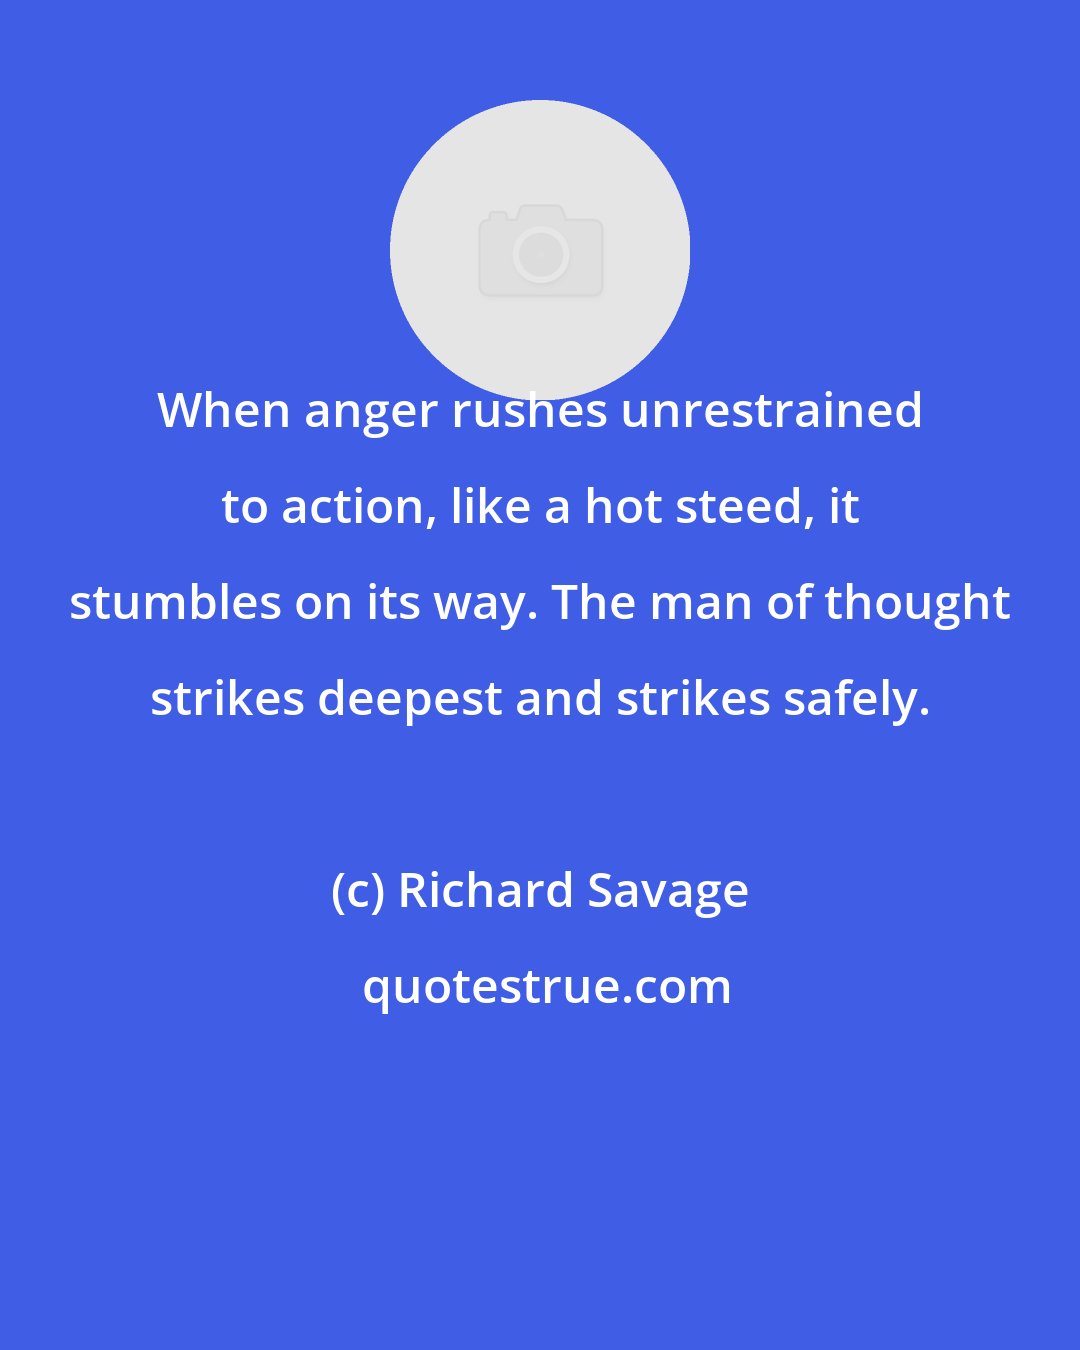 Richard Savage: When anger rushes unrestrained to action, like a hot steed, it stumbles on its way. The man of thought strikes deepest and strikes safely.